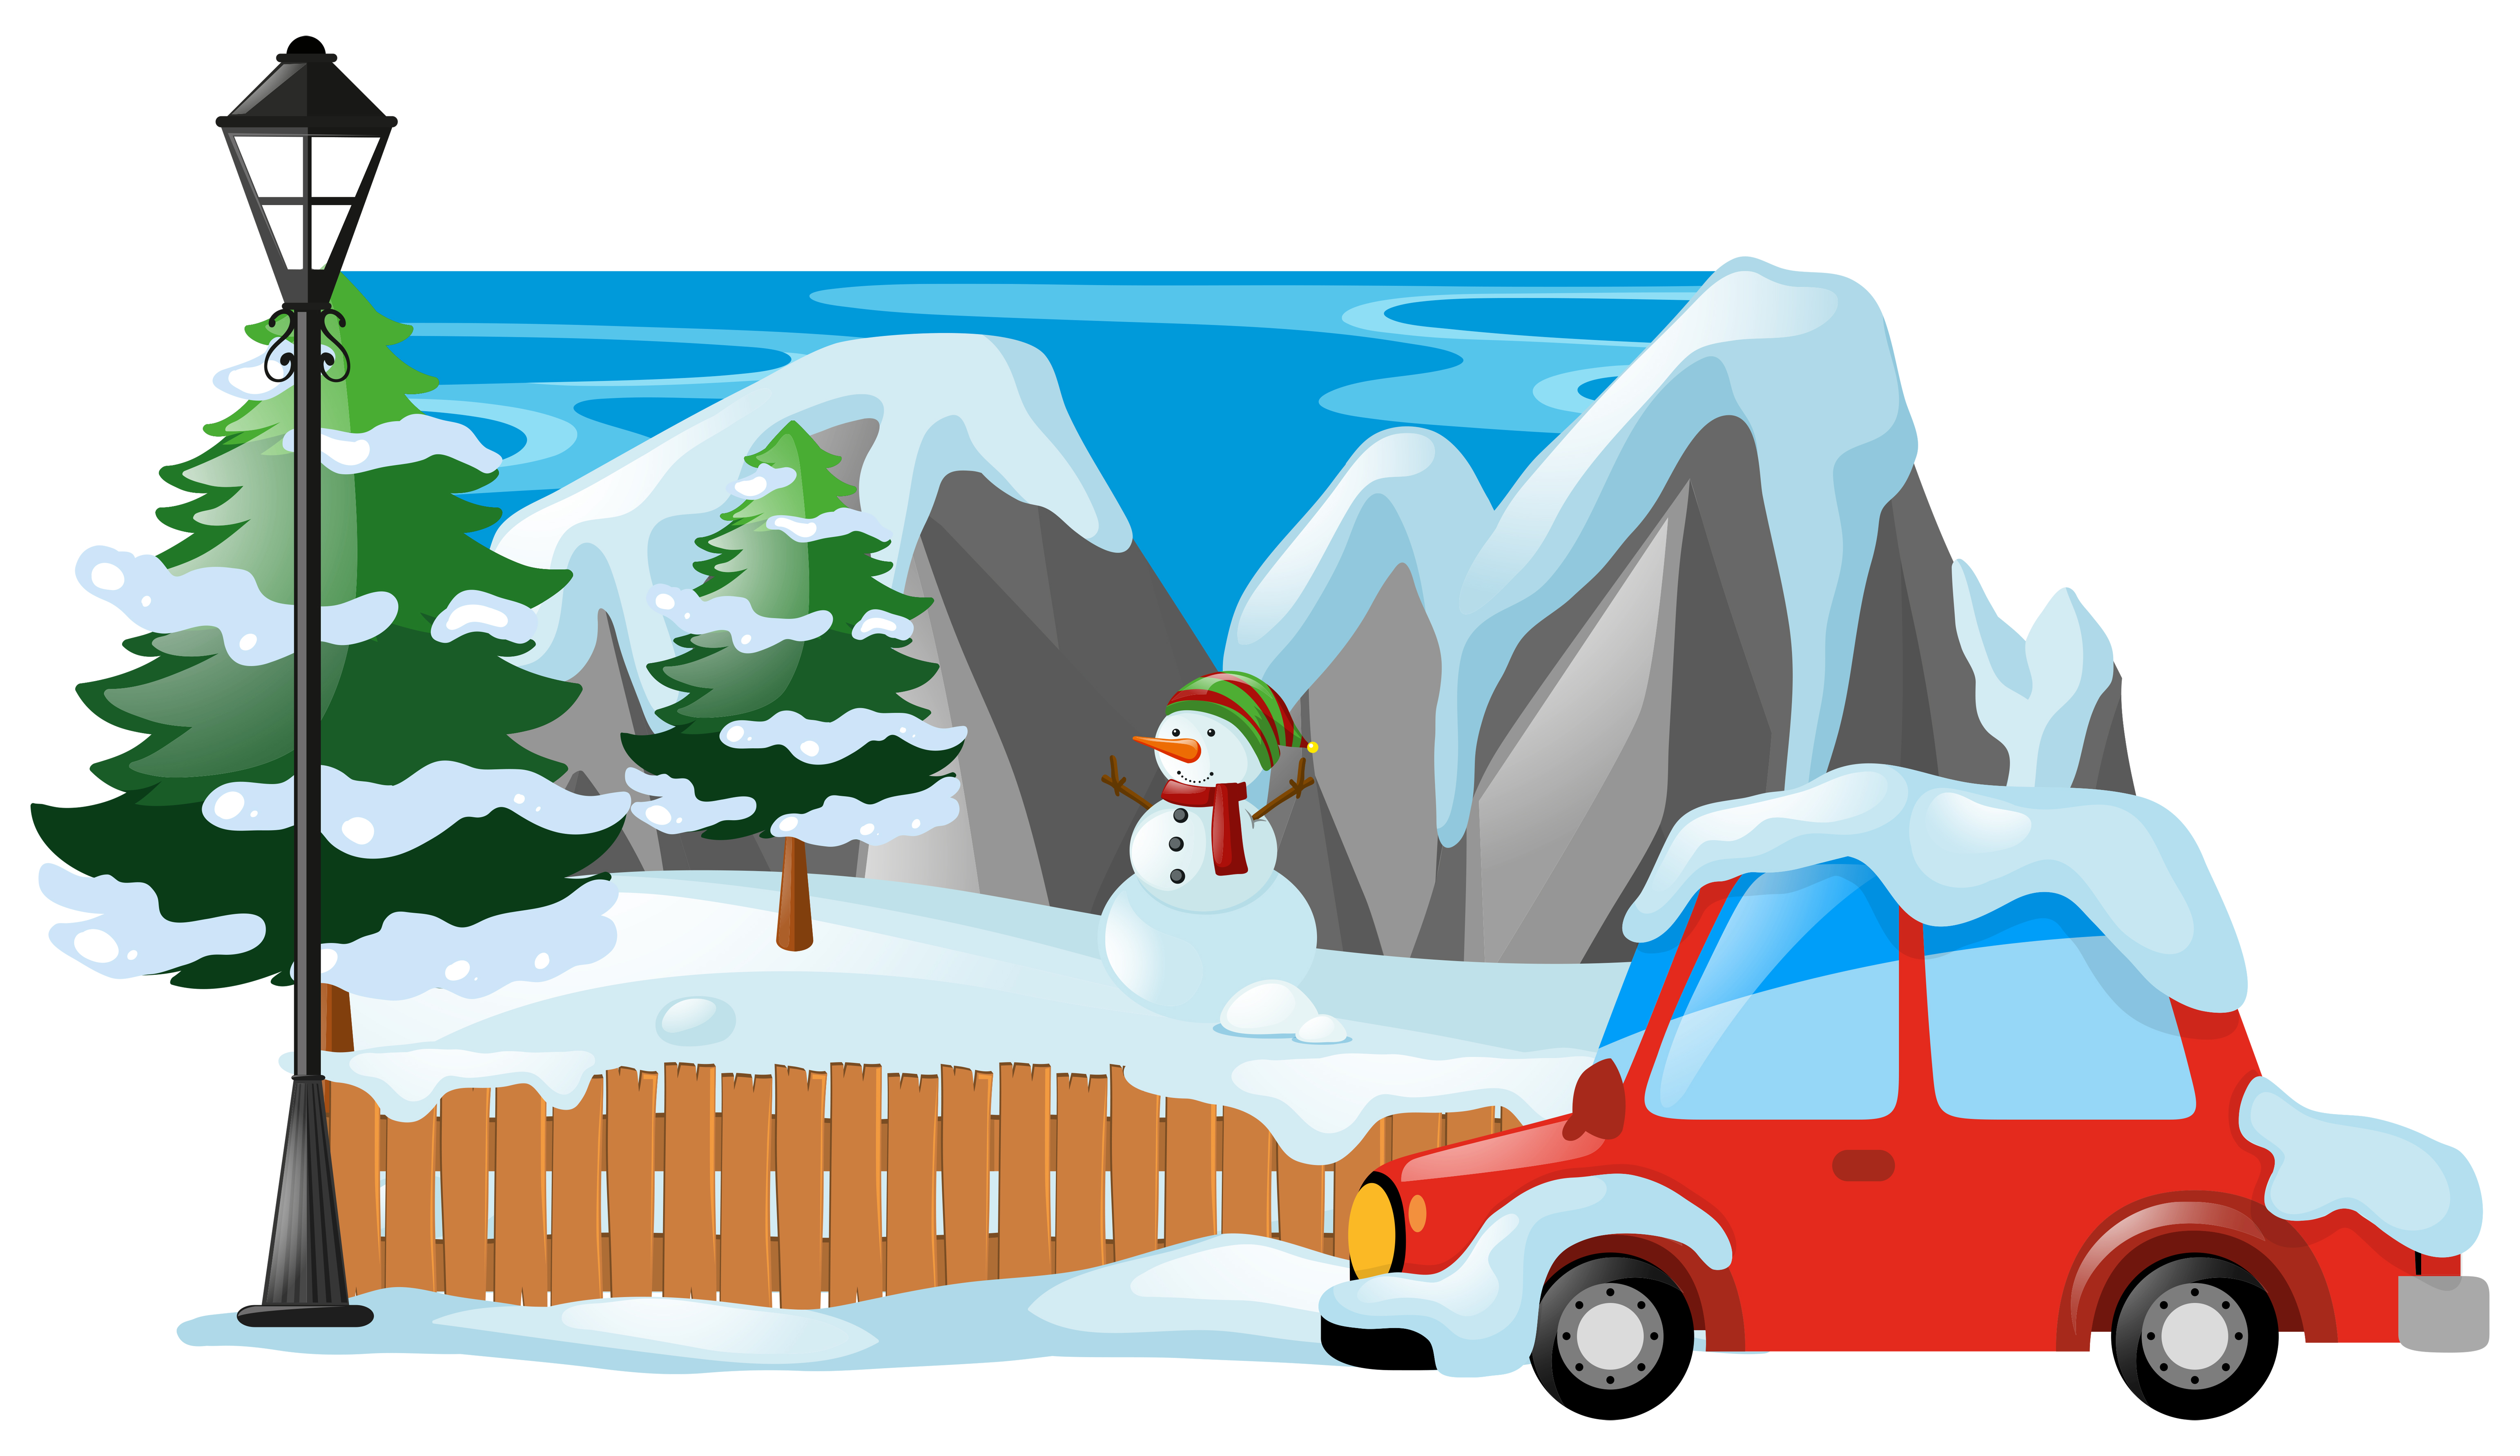 Download the Winter scene with snowman and car 370044 royalty-free Vector f...